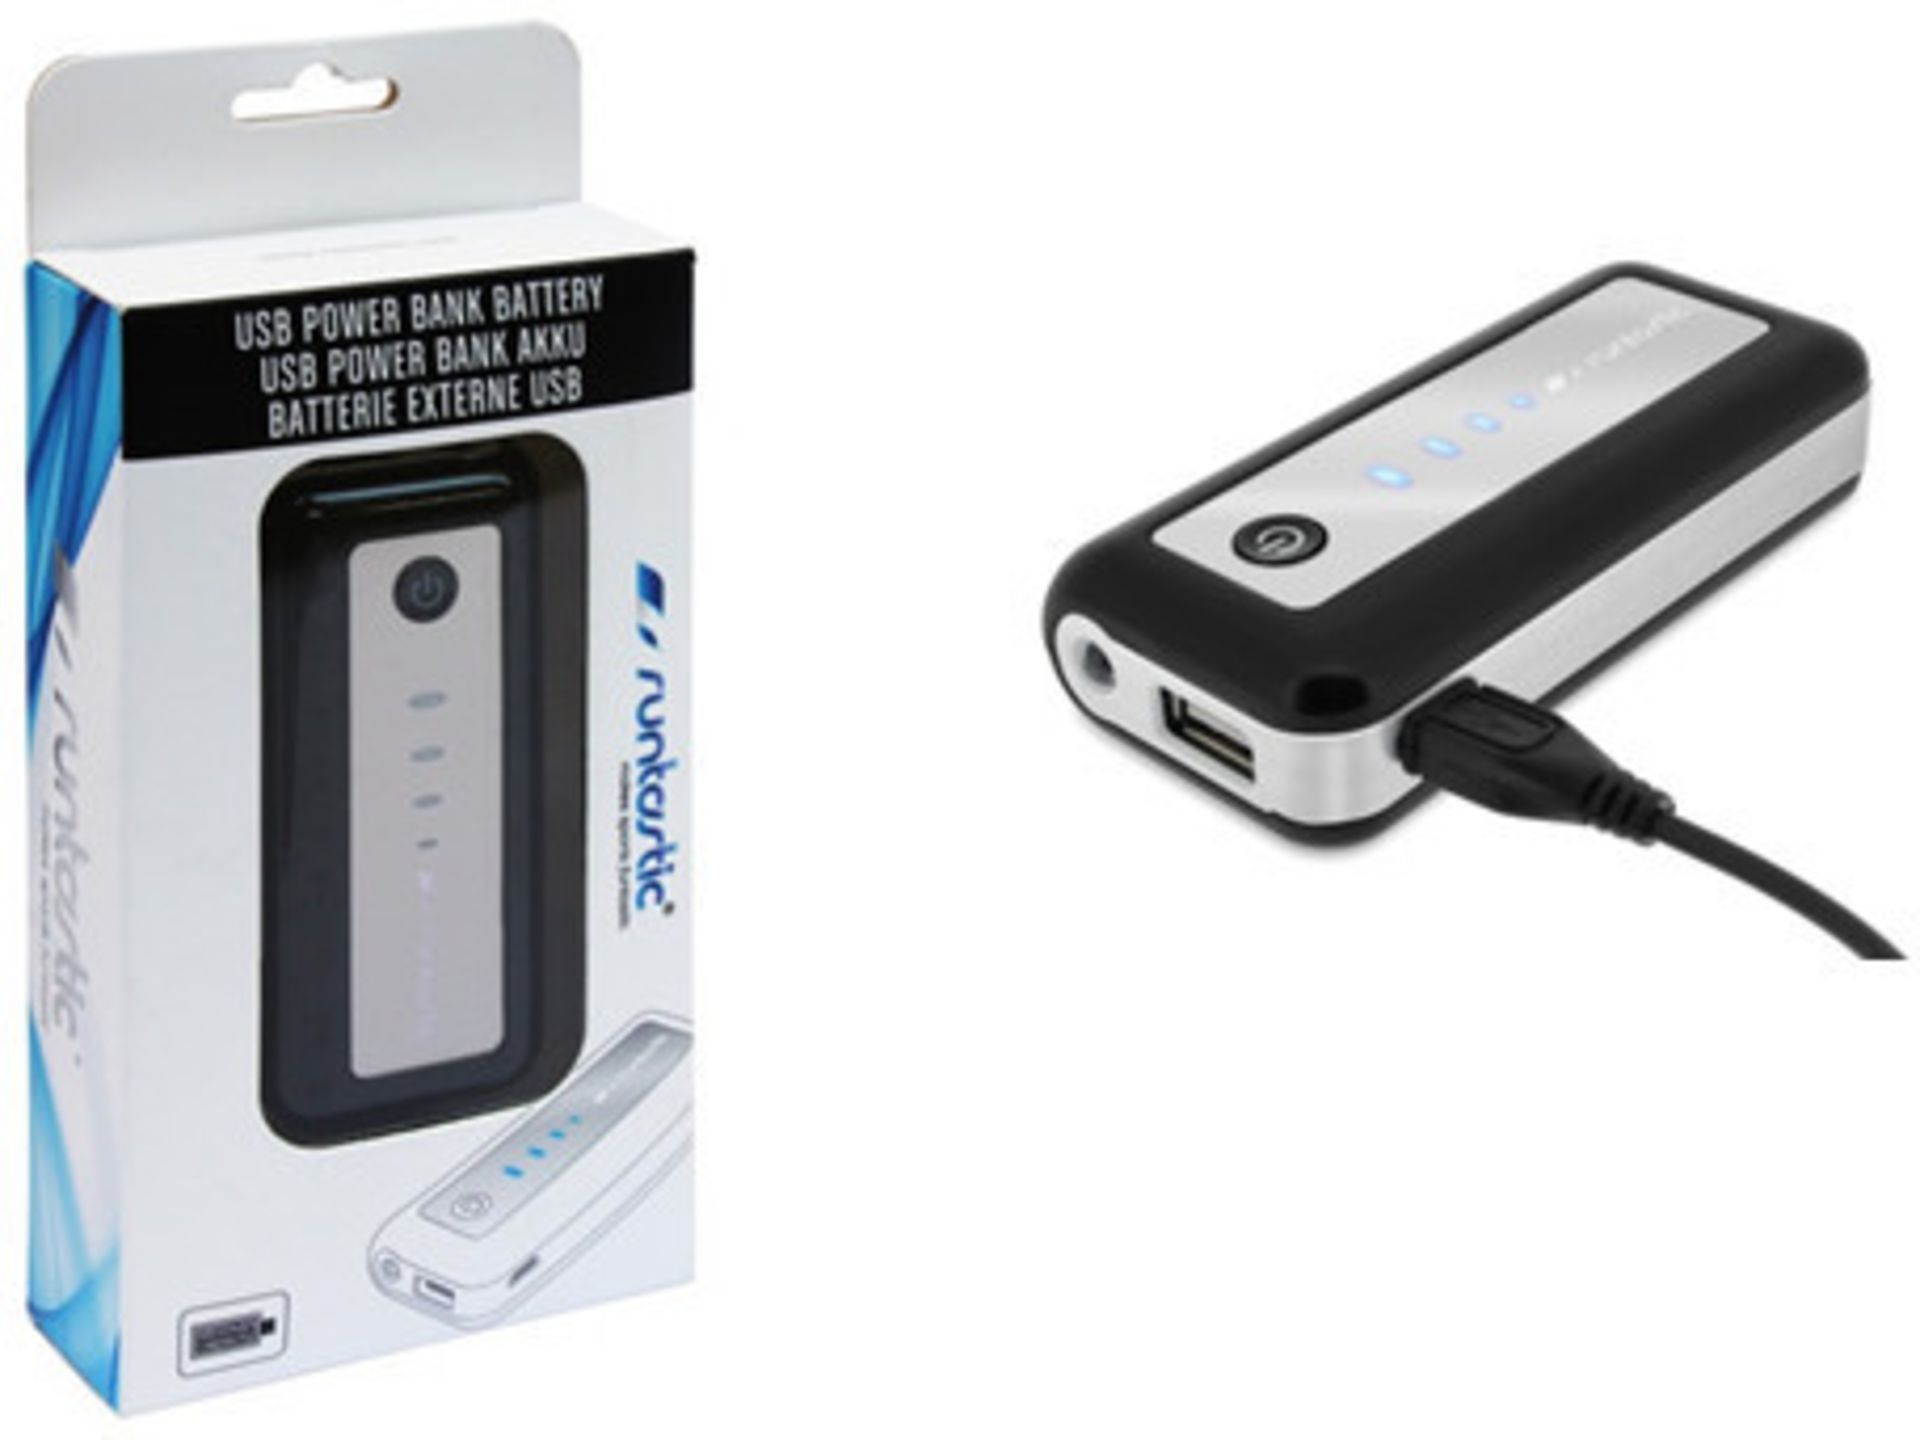 V *TRADE QTY* Brand New Runtastic USB Power Bank With Integrated LED Flashlight eBay Price £43.61